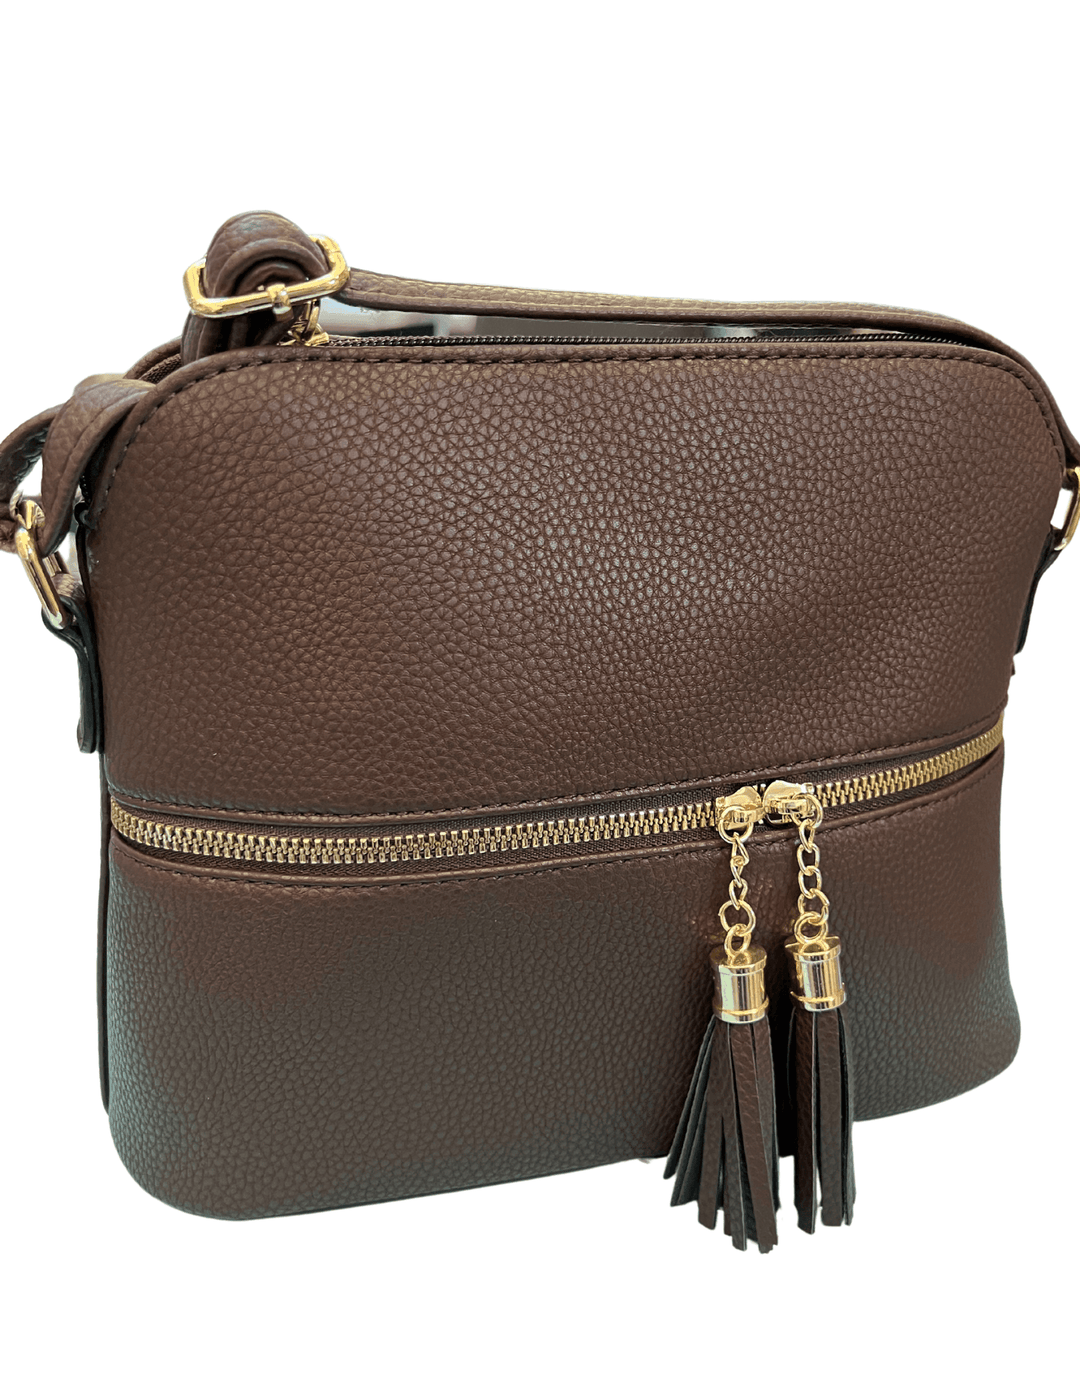 perfect fit every day roomy slim crossbody purse near me 